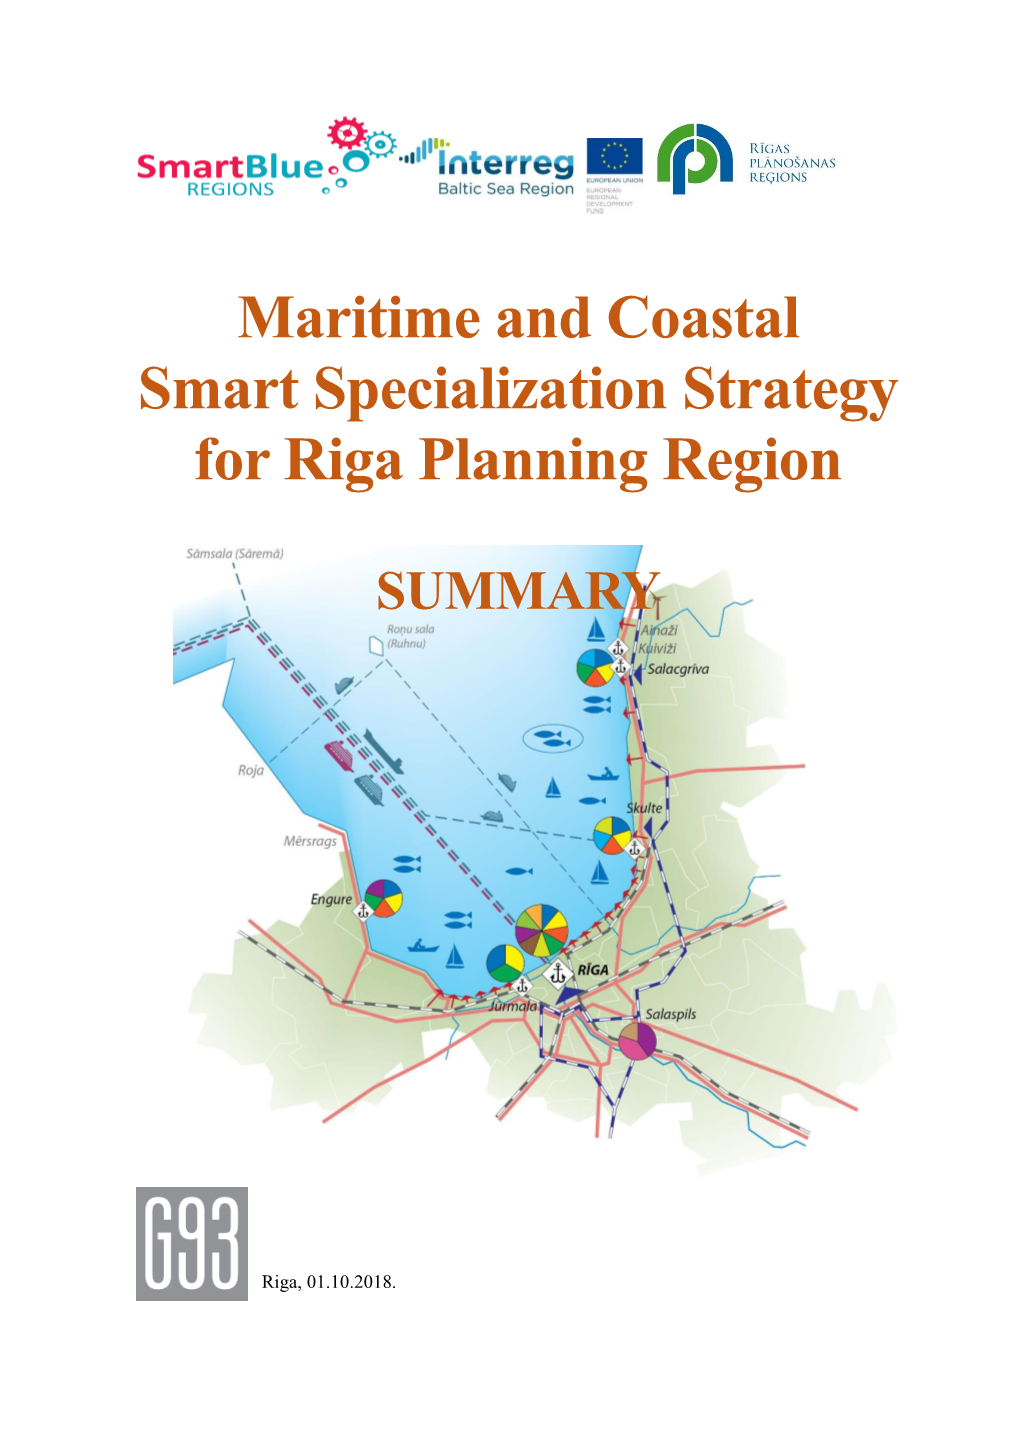 Maritime and Coastal Smart Specialization Strategy for Riga Planning Region